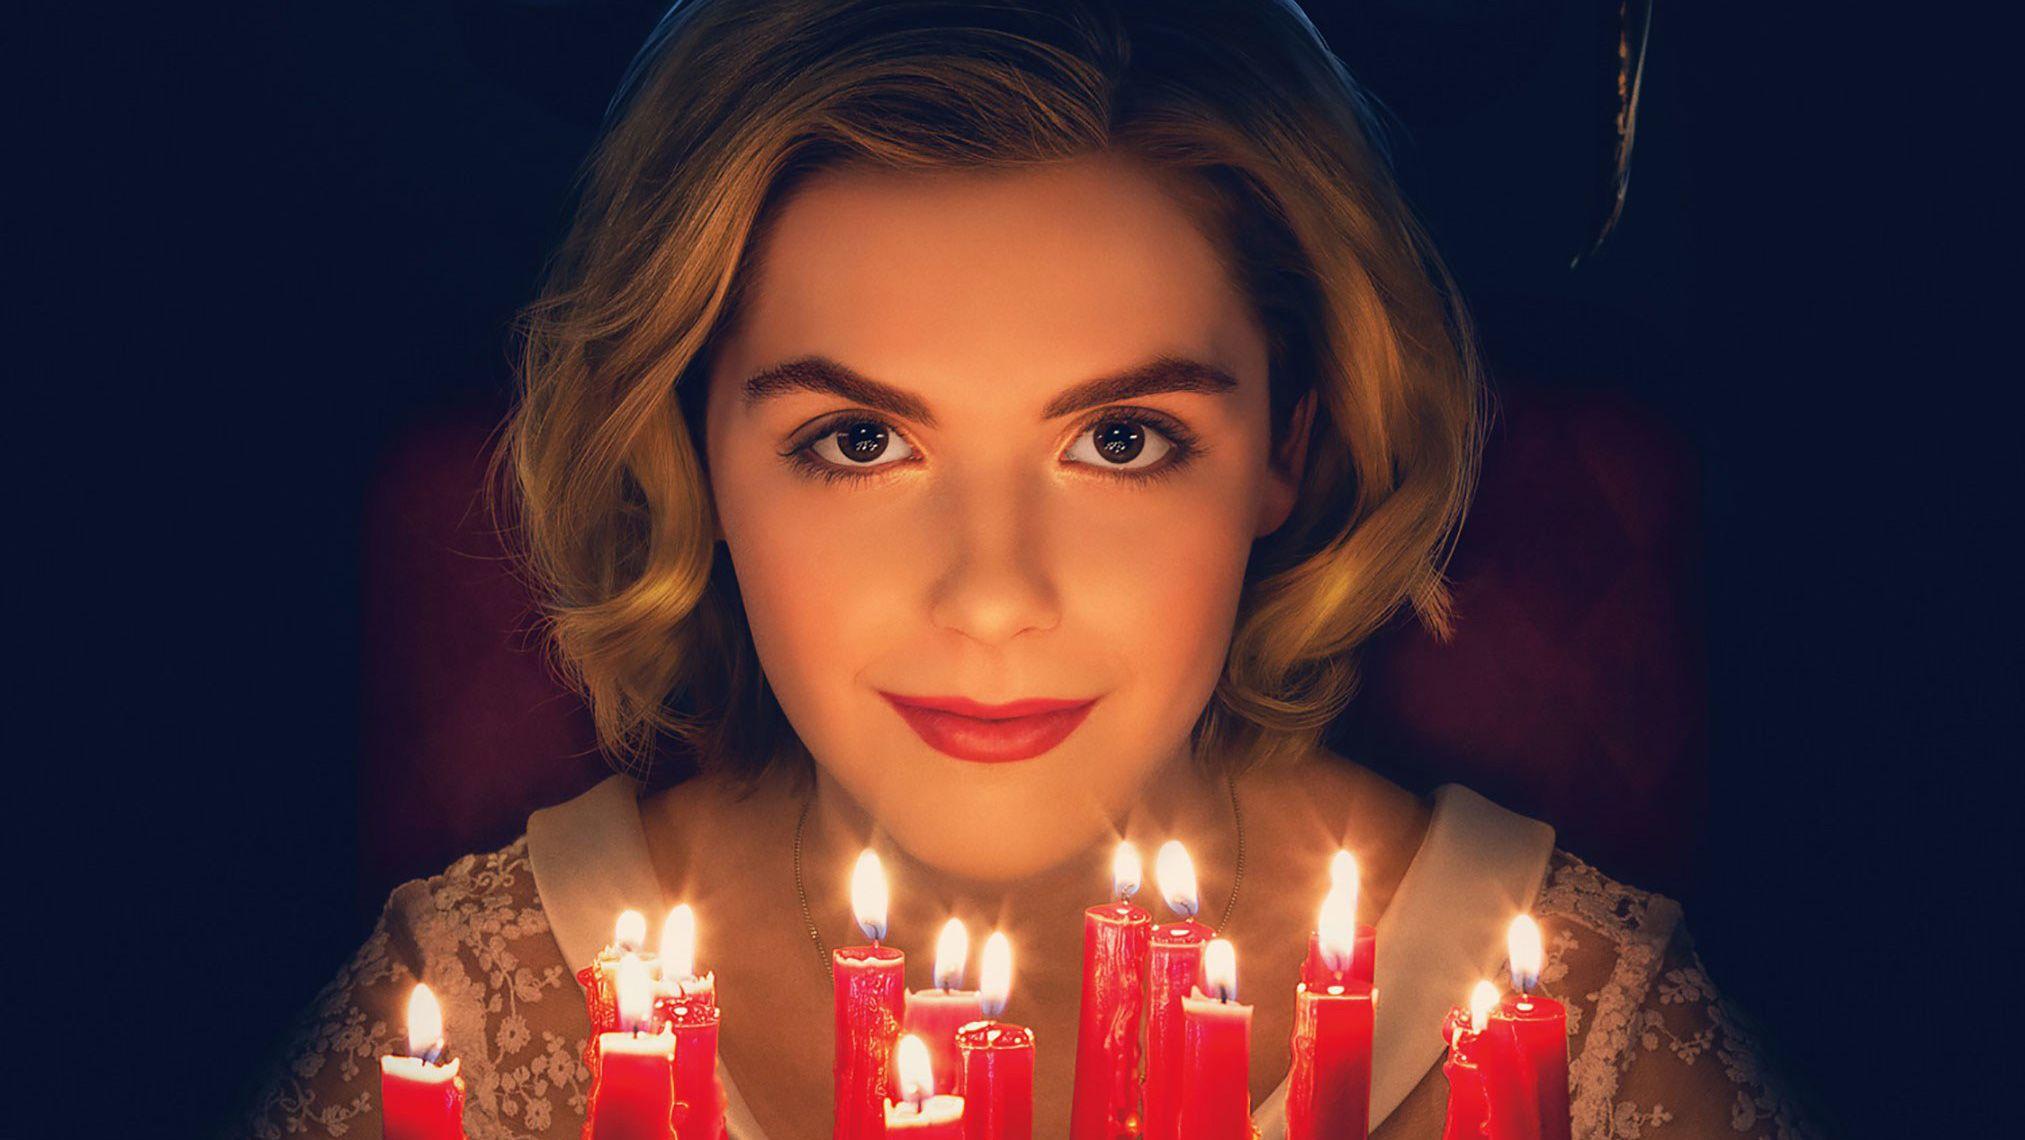 The Chilling Adventures Of Sabrina 2018 Poster, HD Tv Shows, 4k